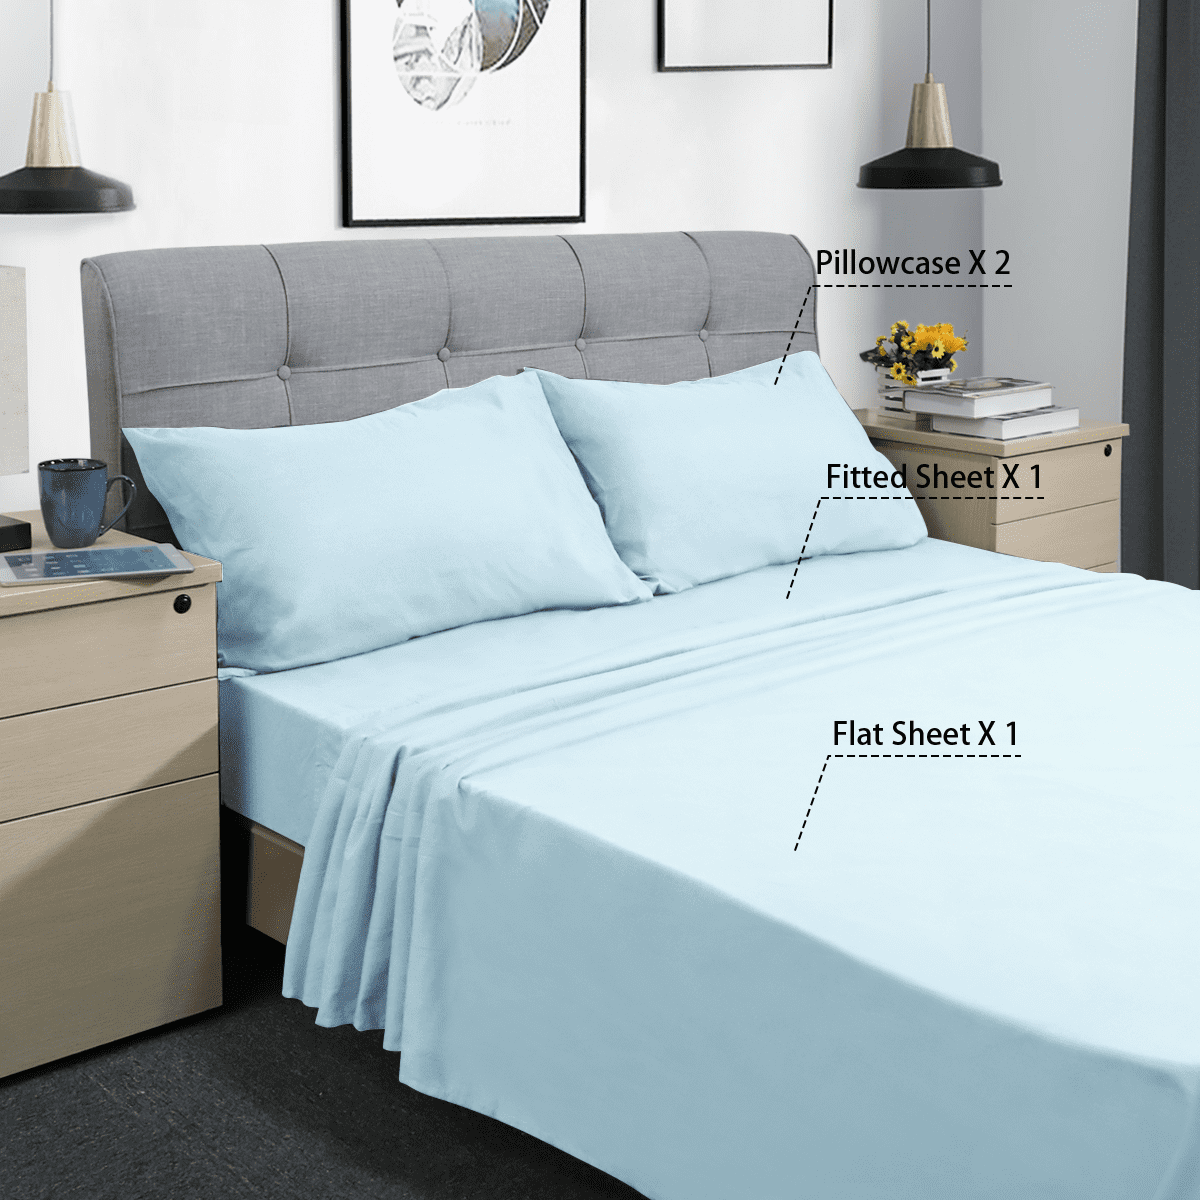 100GSM Soft & Brushed Microfiber 4PCs Sheet Set with 2 Pillowcases Fits up to 17 1 Flat Sheet and 1 Fitted Sheet with 15 Pocket Hypoallergenic & Luxurious Sheet Set Anti-Wrinkle & Fade Resistant Bed Sheet Set Bedding 4 Homes 4 Pieces Soft Sheet Set 